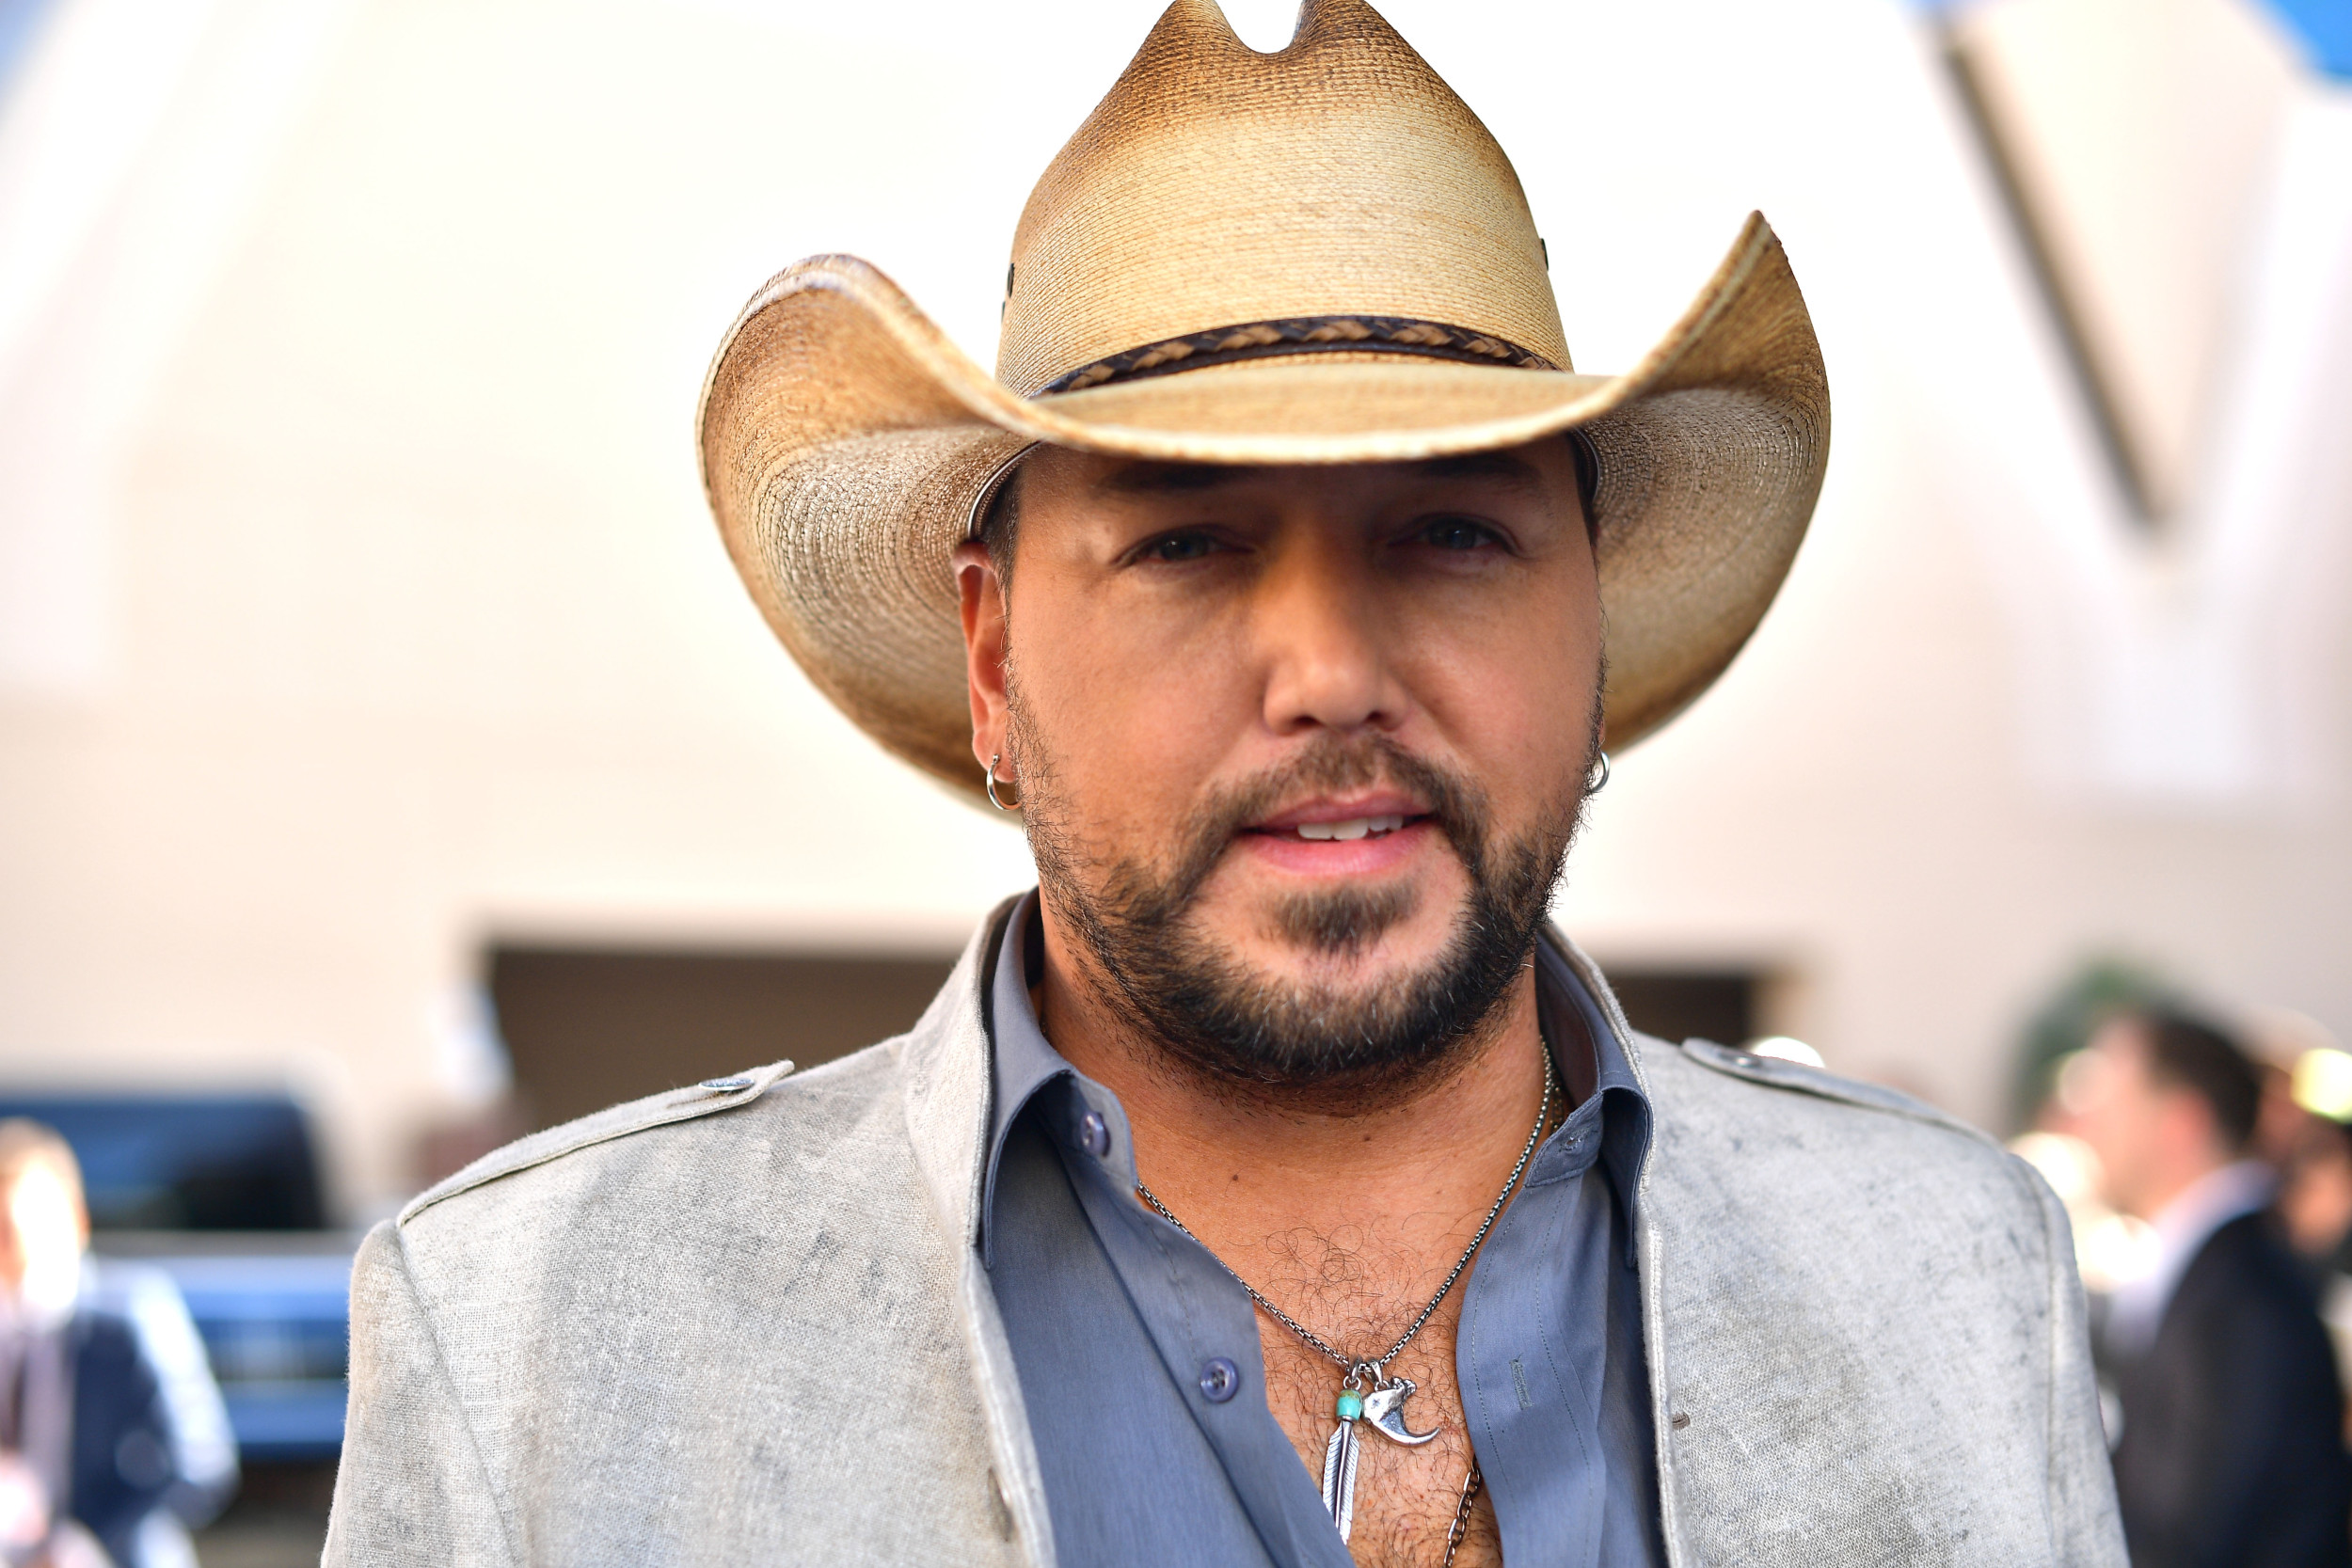 Trump Supporters Don't Think Jason Aldean's 'Small Town' Song Is 'Racist'